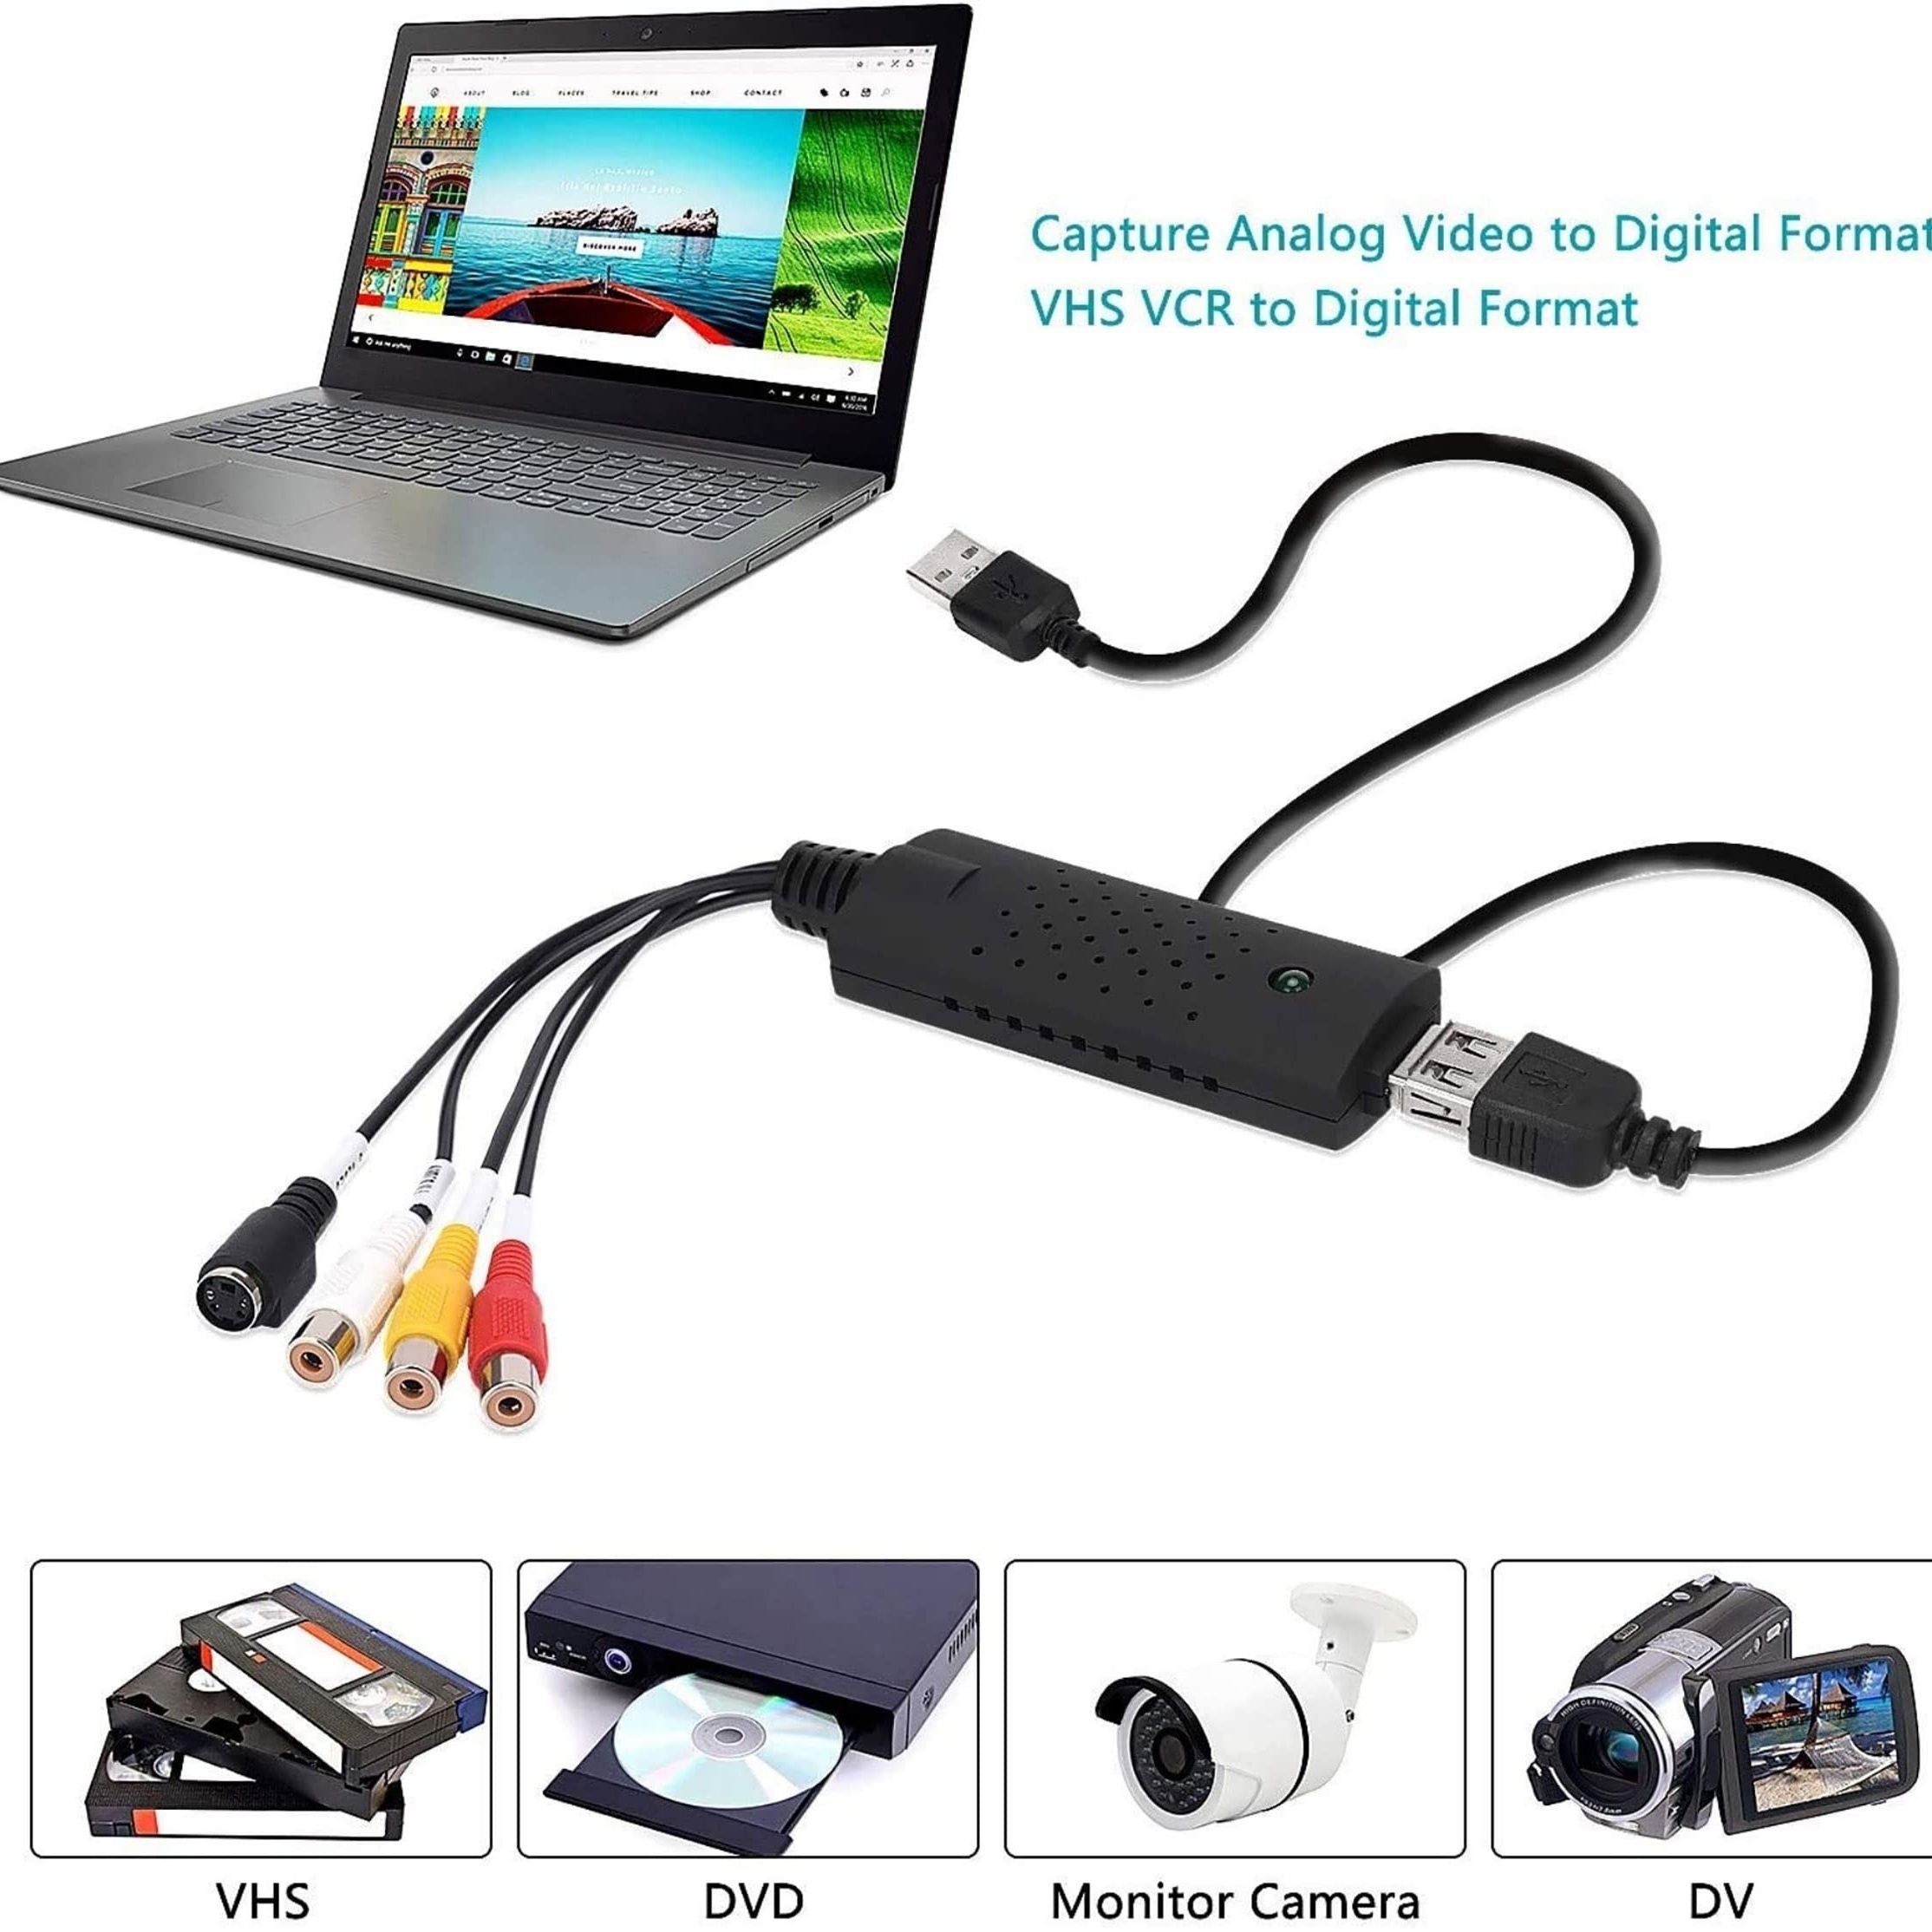 VHS to Digital Converter, Video to Digital Converter,1080P Video Device,  Analog to Digital Video Converter, Video & Audio Recording from VCR, VHS